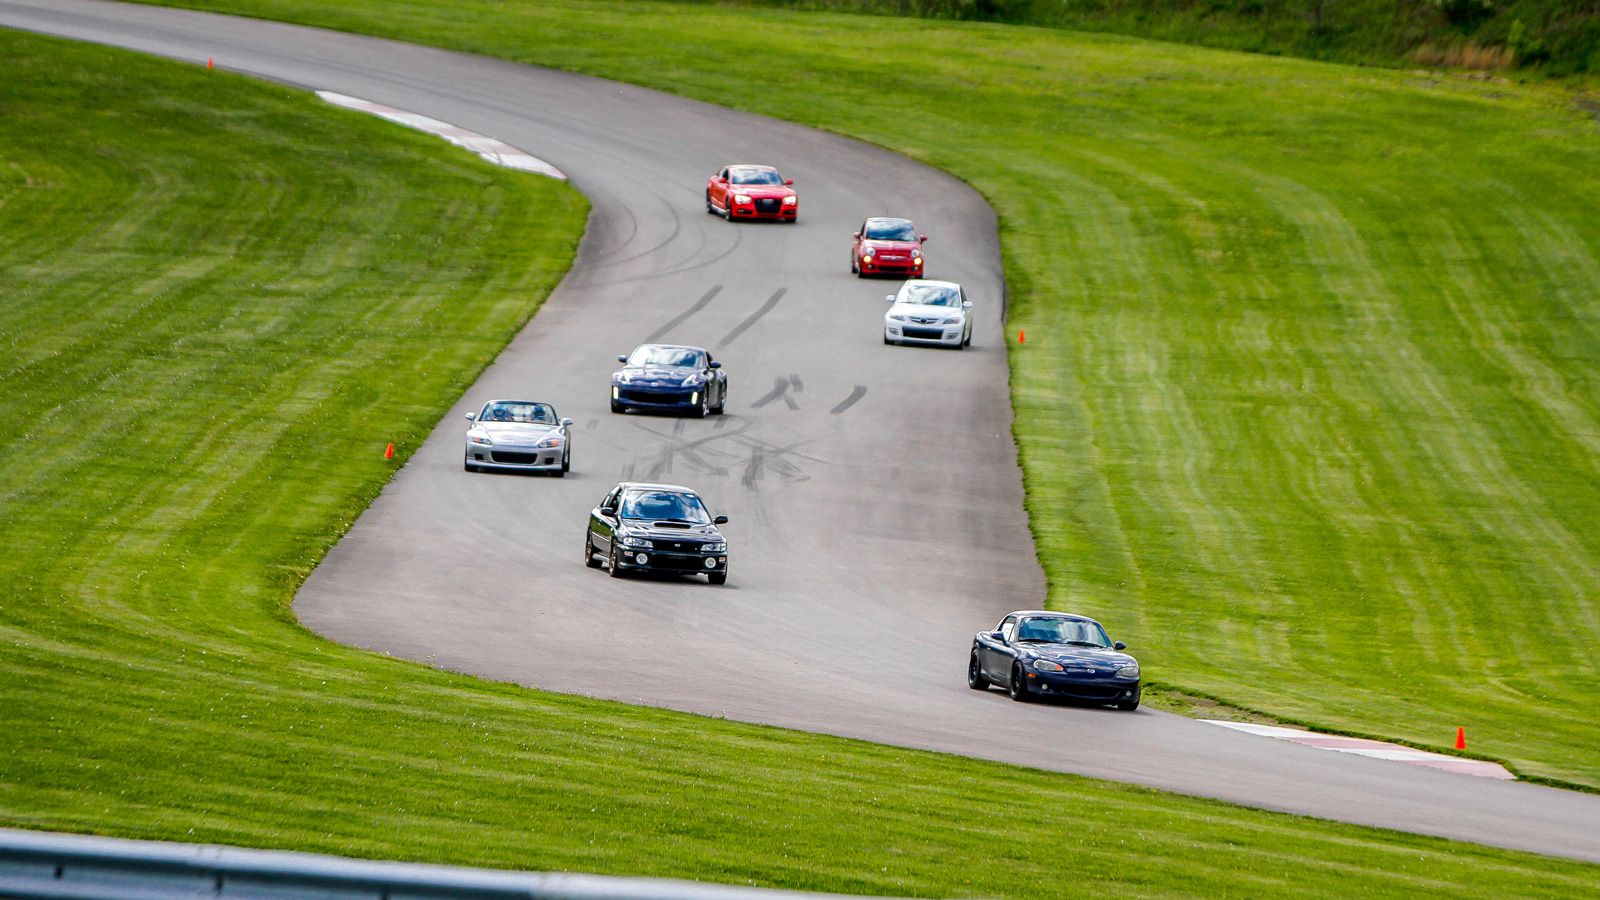 SCCA Track Night in America Flat out for 150